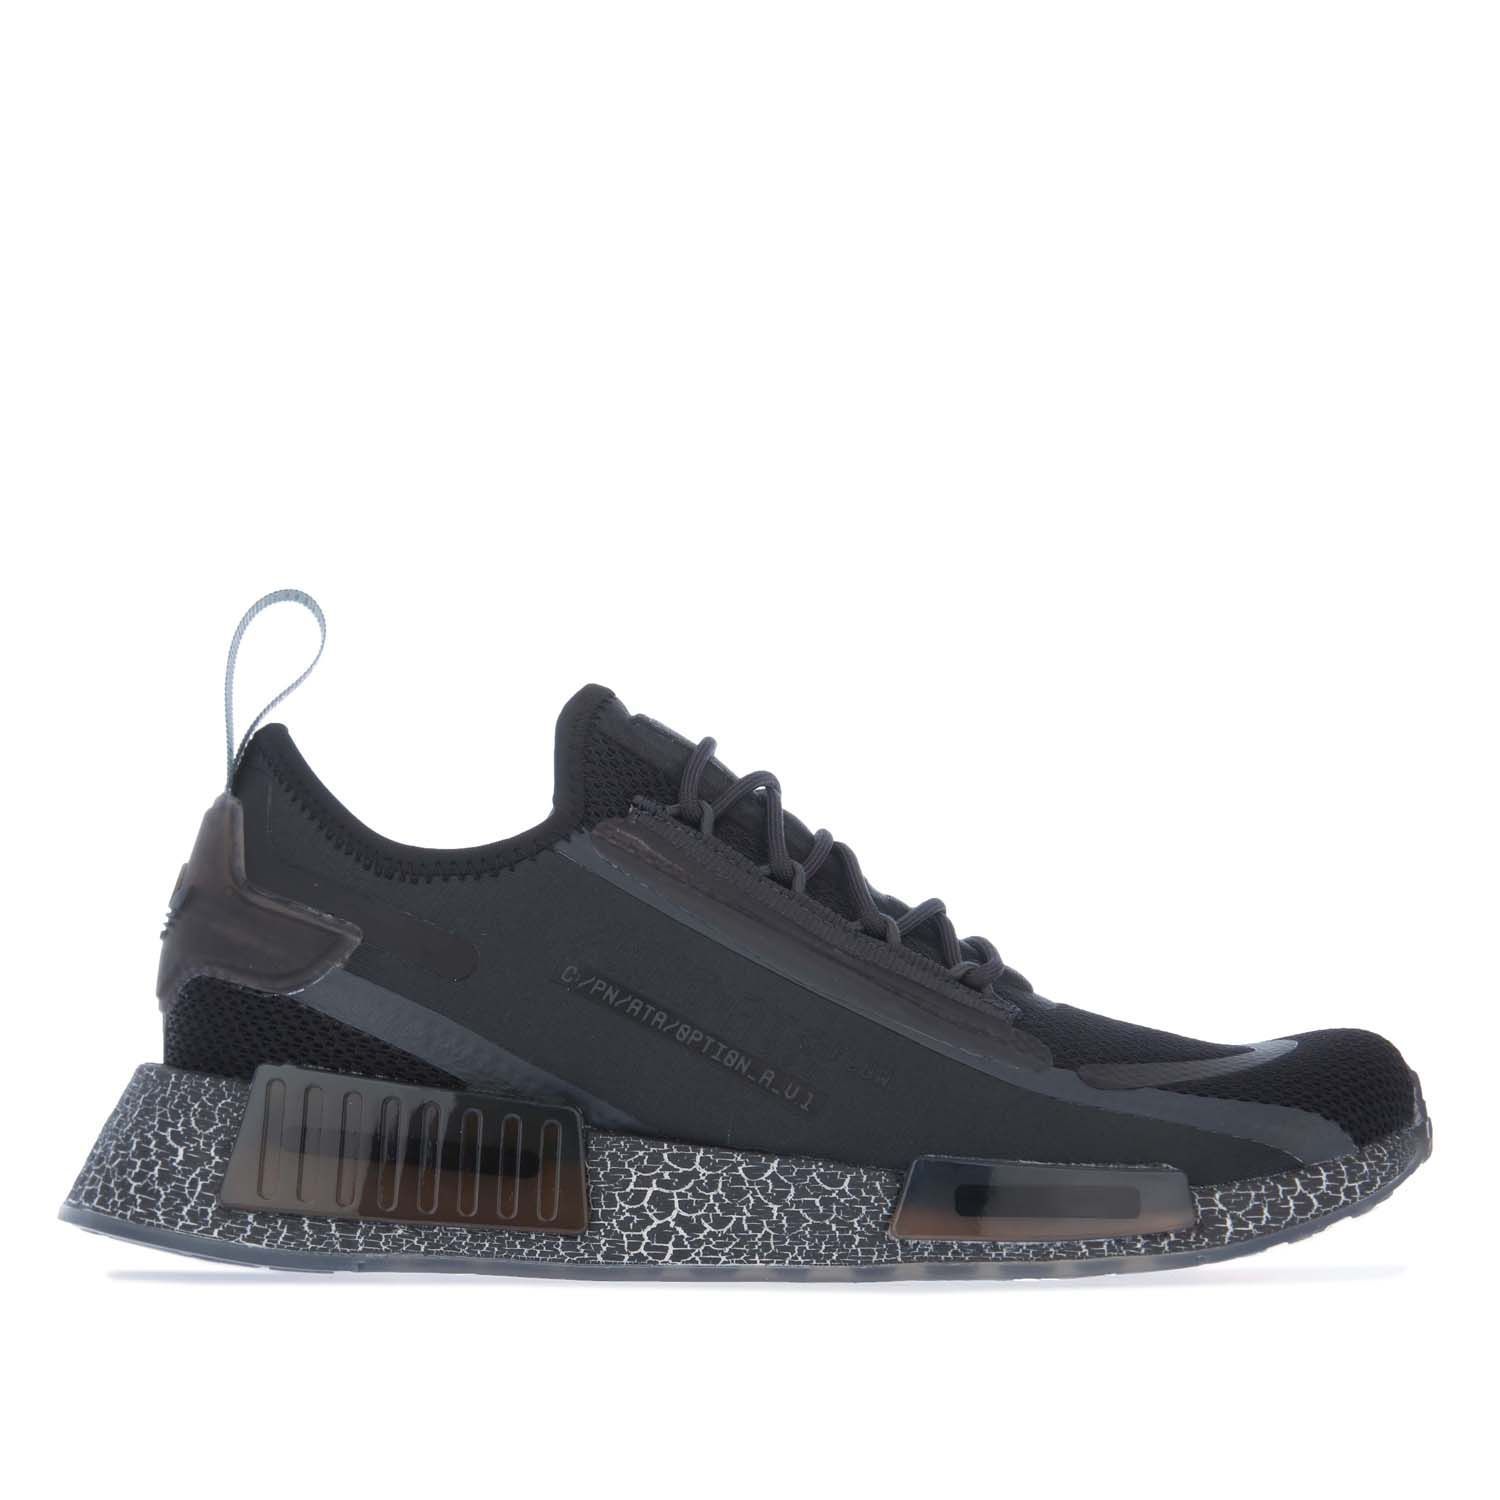 Mens adidas Originals NMD_R1 Spectoo Trainers in black.- Knit textile upper.- Lace closure.- Stretchy  sock-like feel. - Boost midsole. - Gum rubber outsole.- Textile upper and lining  Synthetic sole.- Ref.: GZ9265